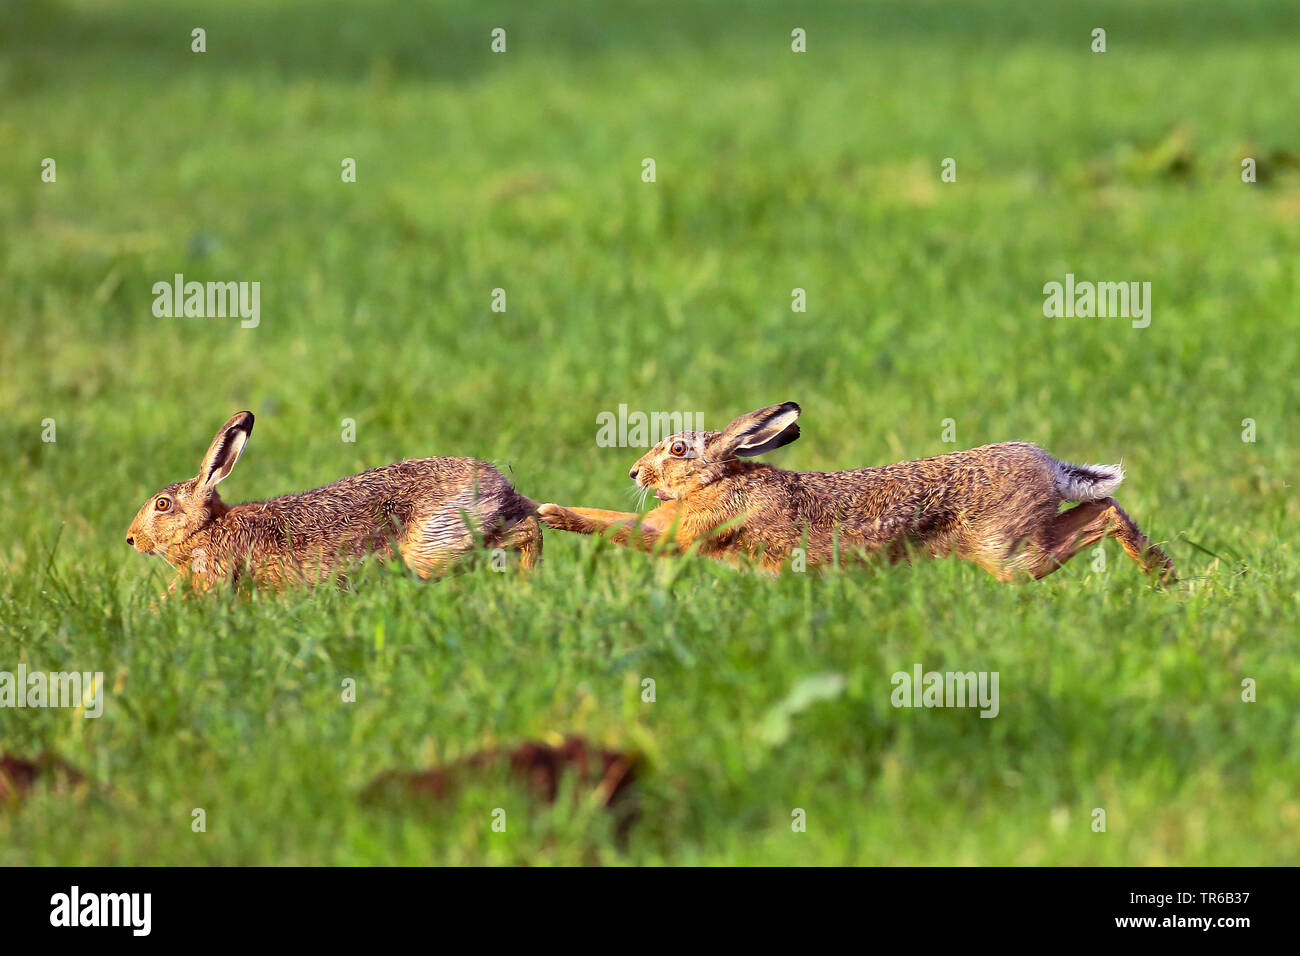 European hare, Brown hare (Lepus europaeus), two brown hares chasing each other in a meadow, side view, Germany Stock Photo